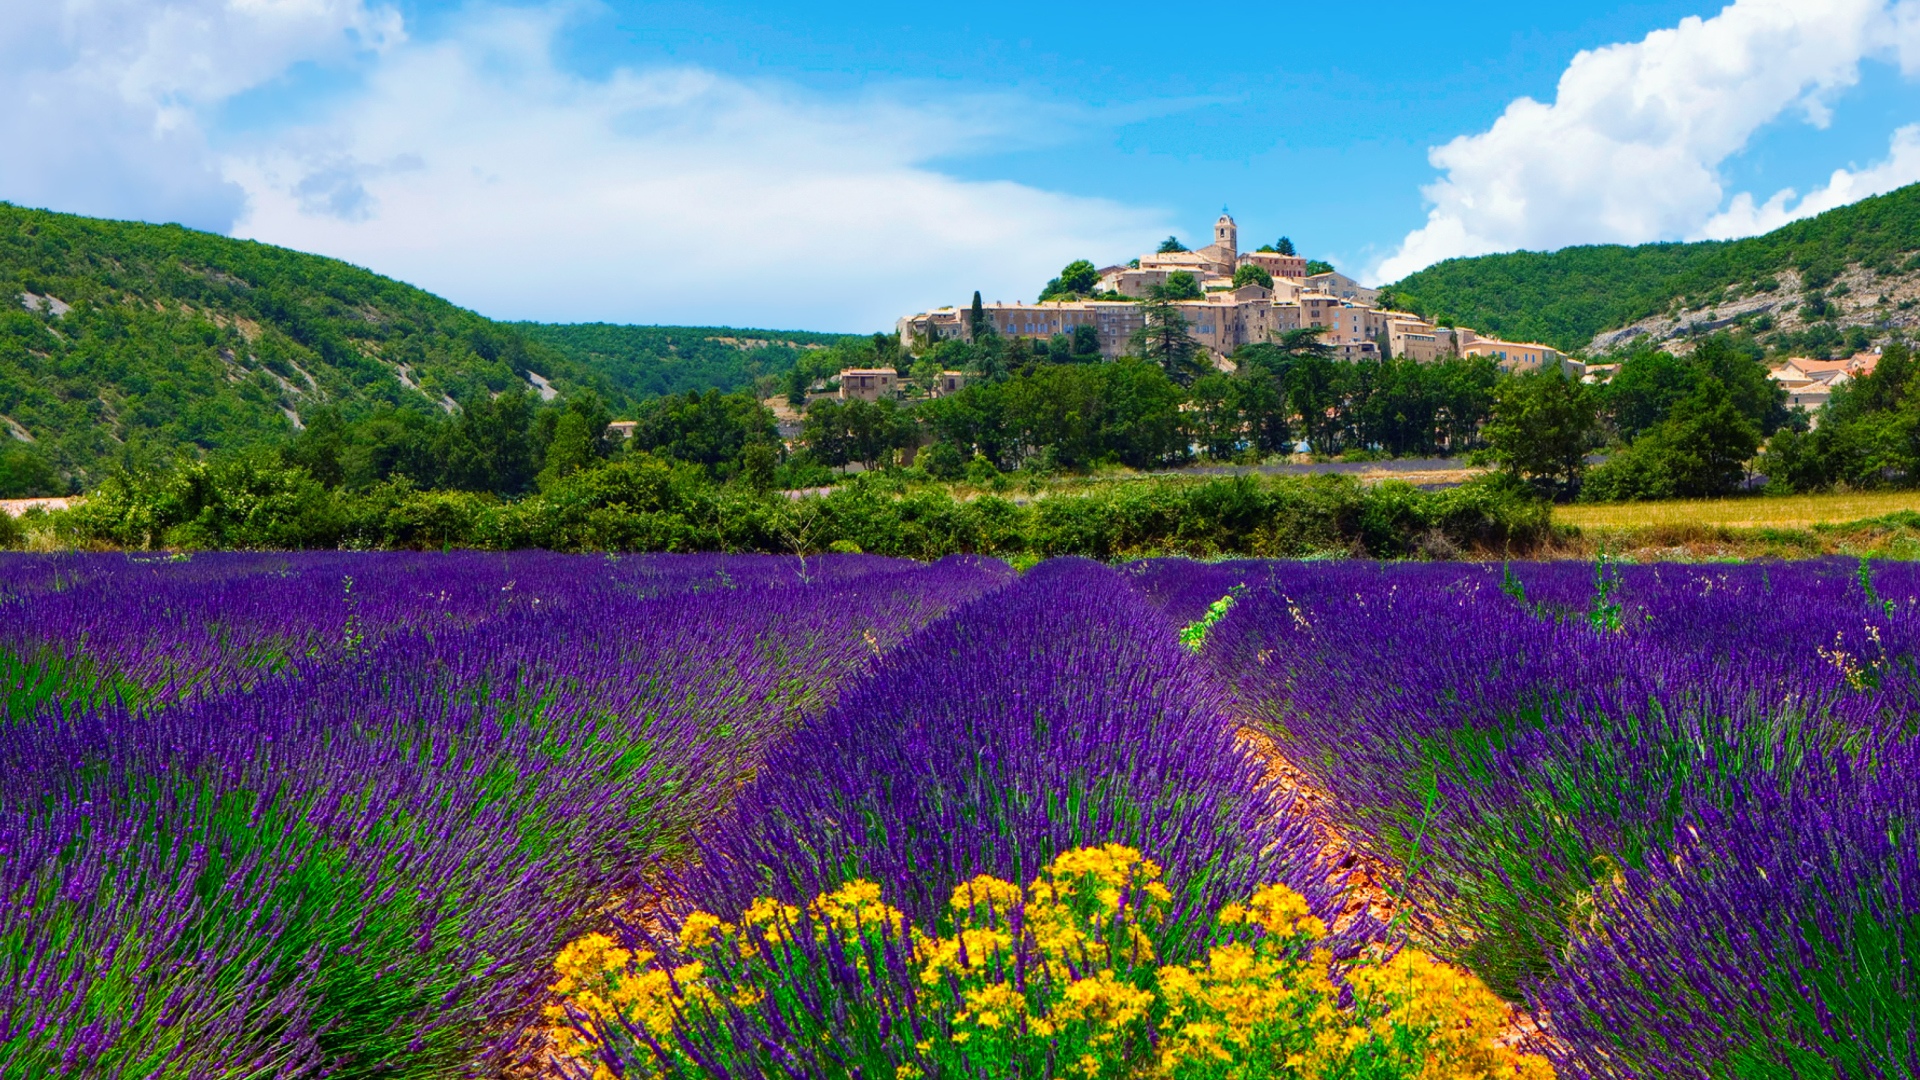 Lavender Field In Provence France Wallpaper For